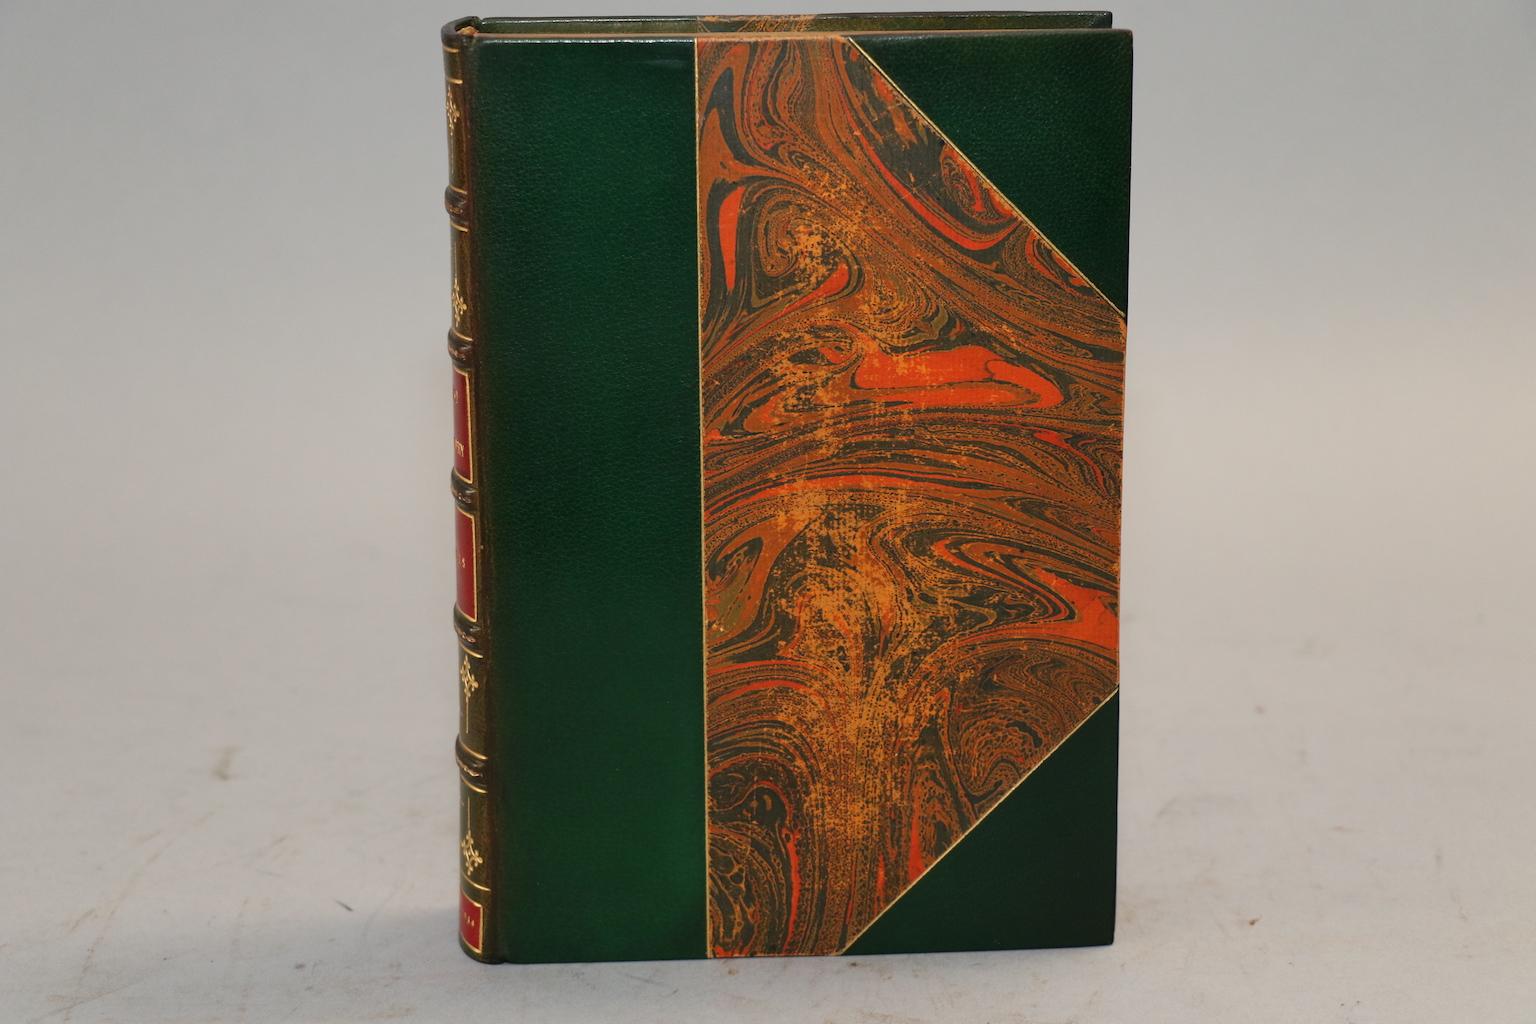 Dyed Books, H.G. Wells' 